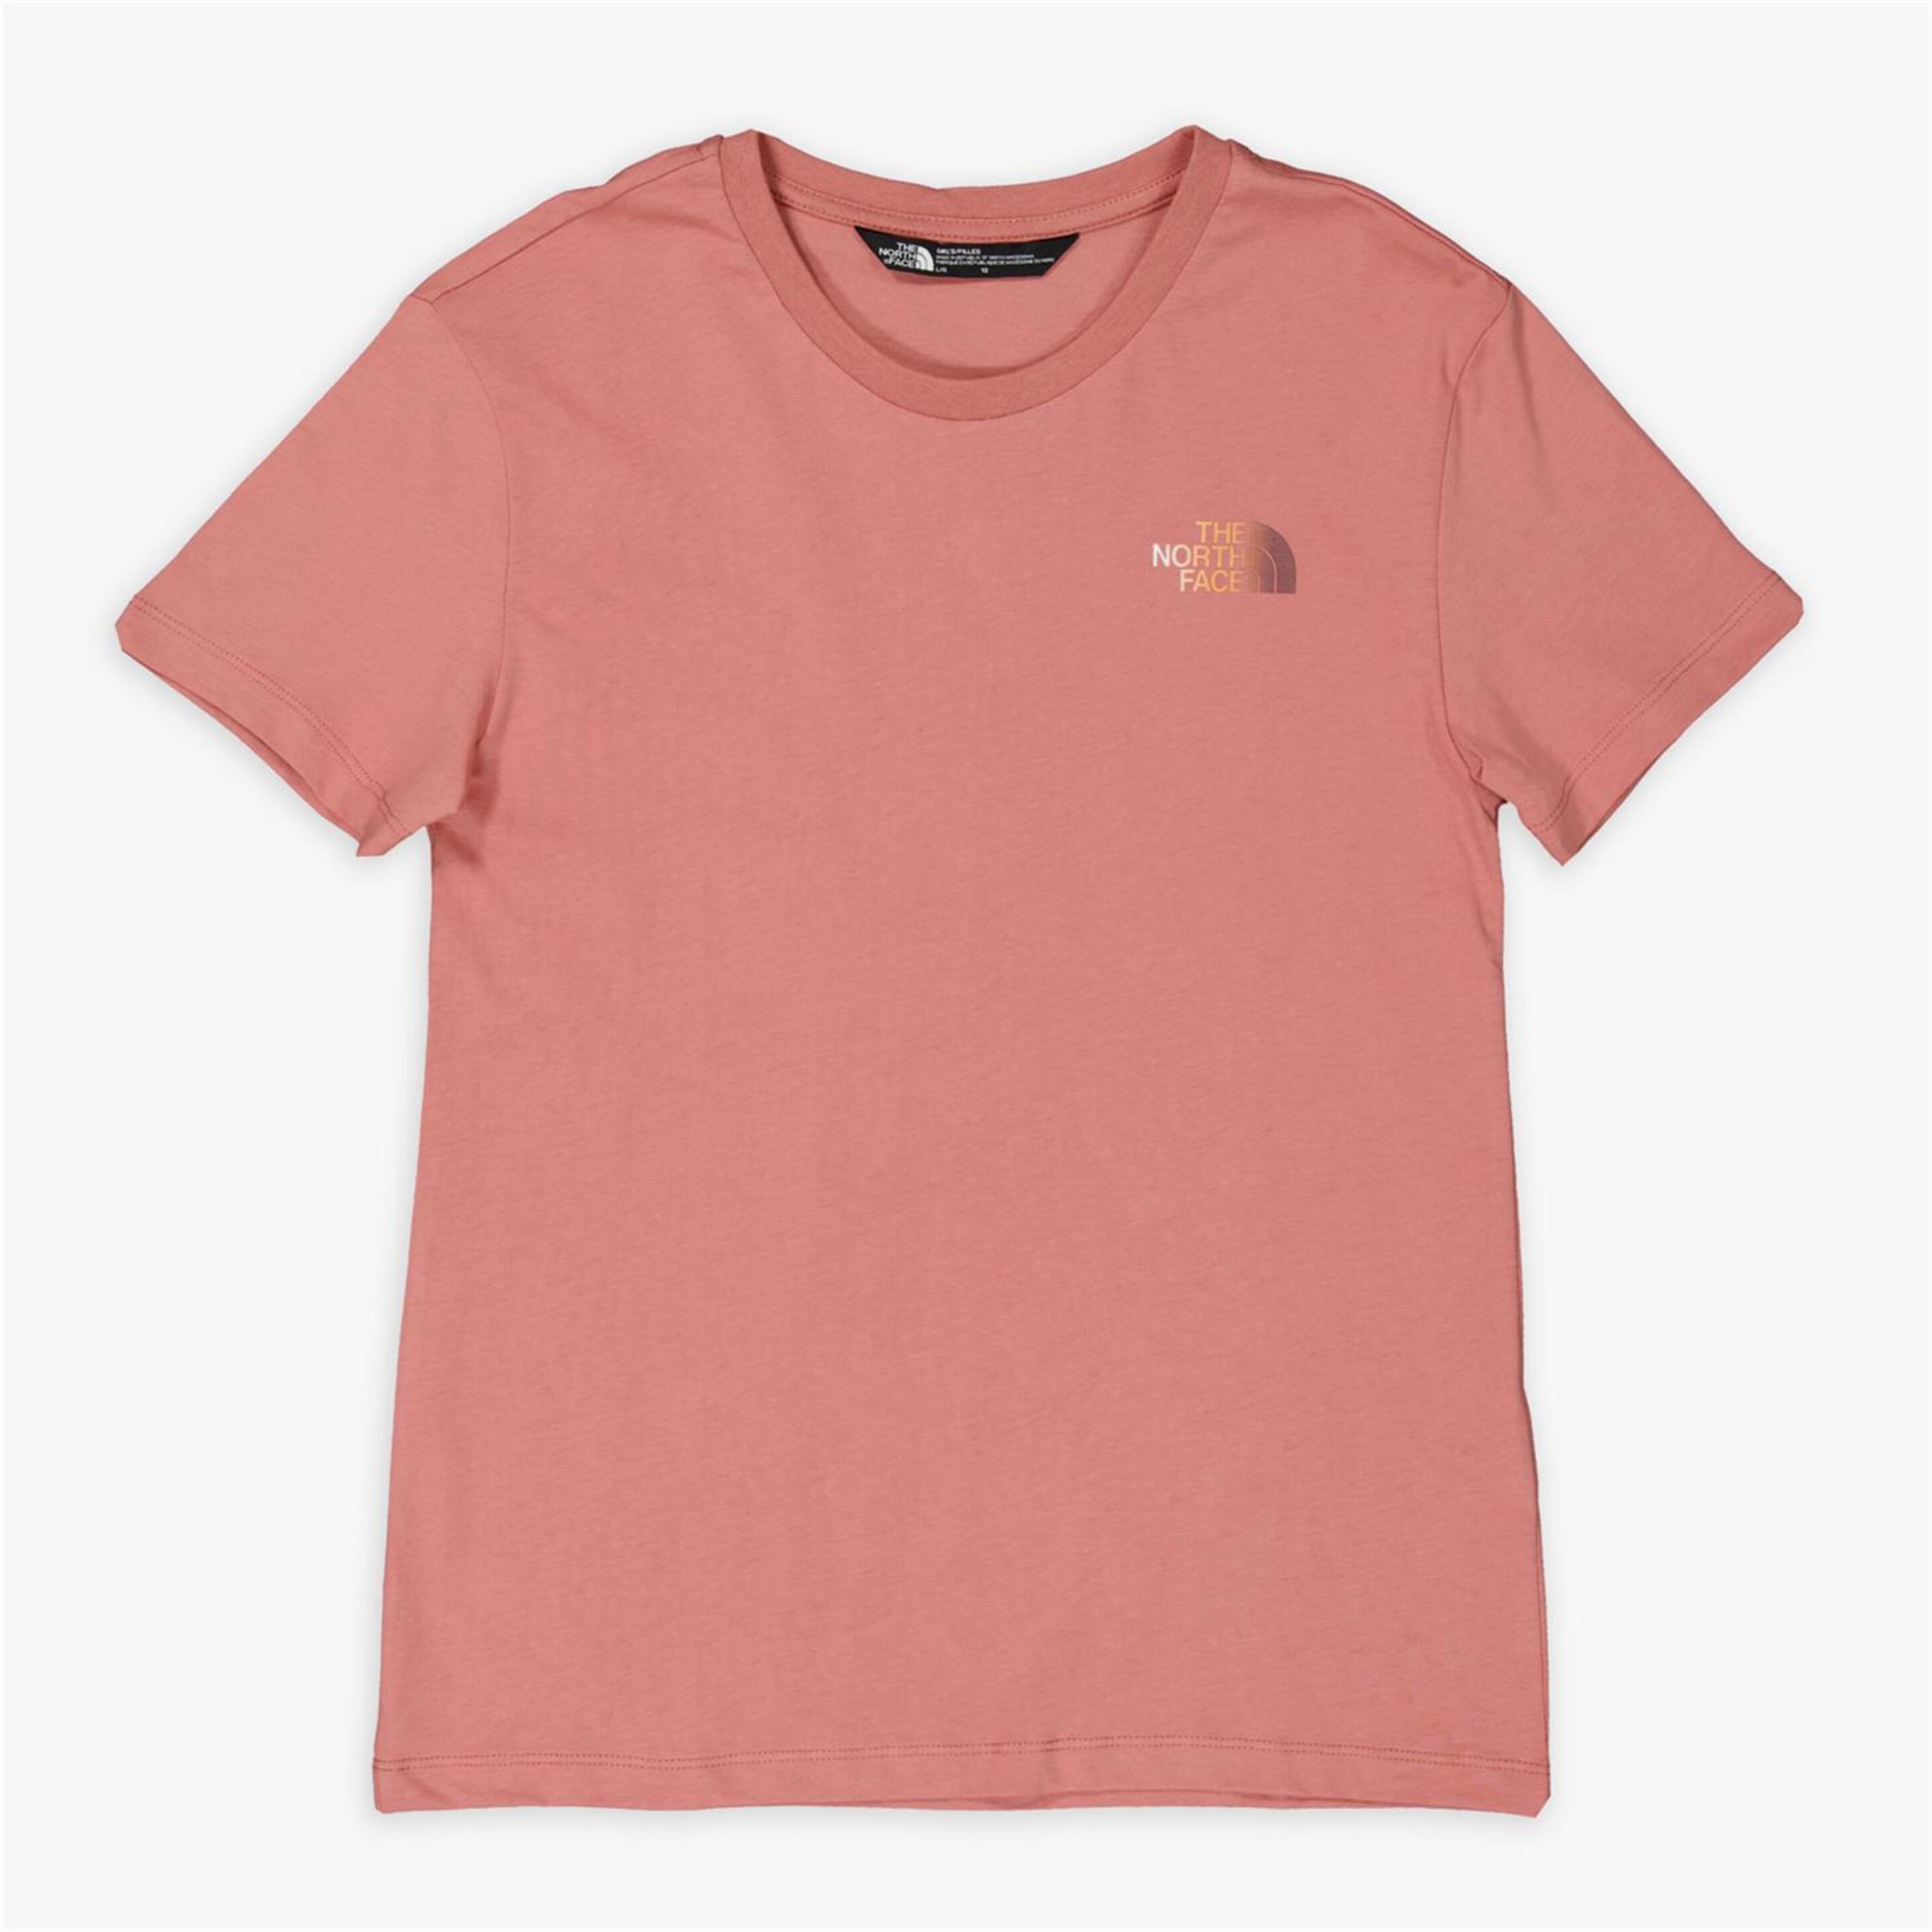 The North Face Relaxed Graphic 2 - rosa - T-shirt Trekking Rapariga